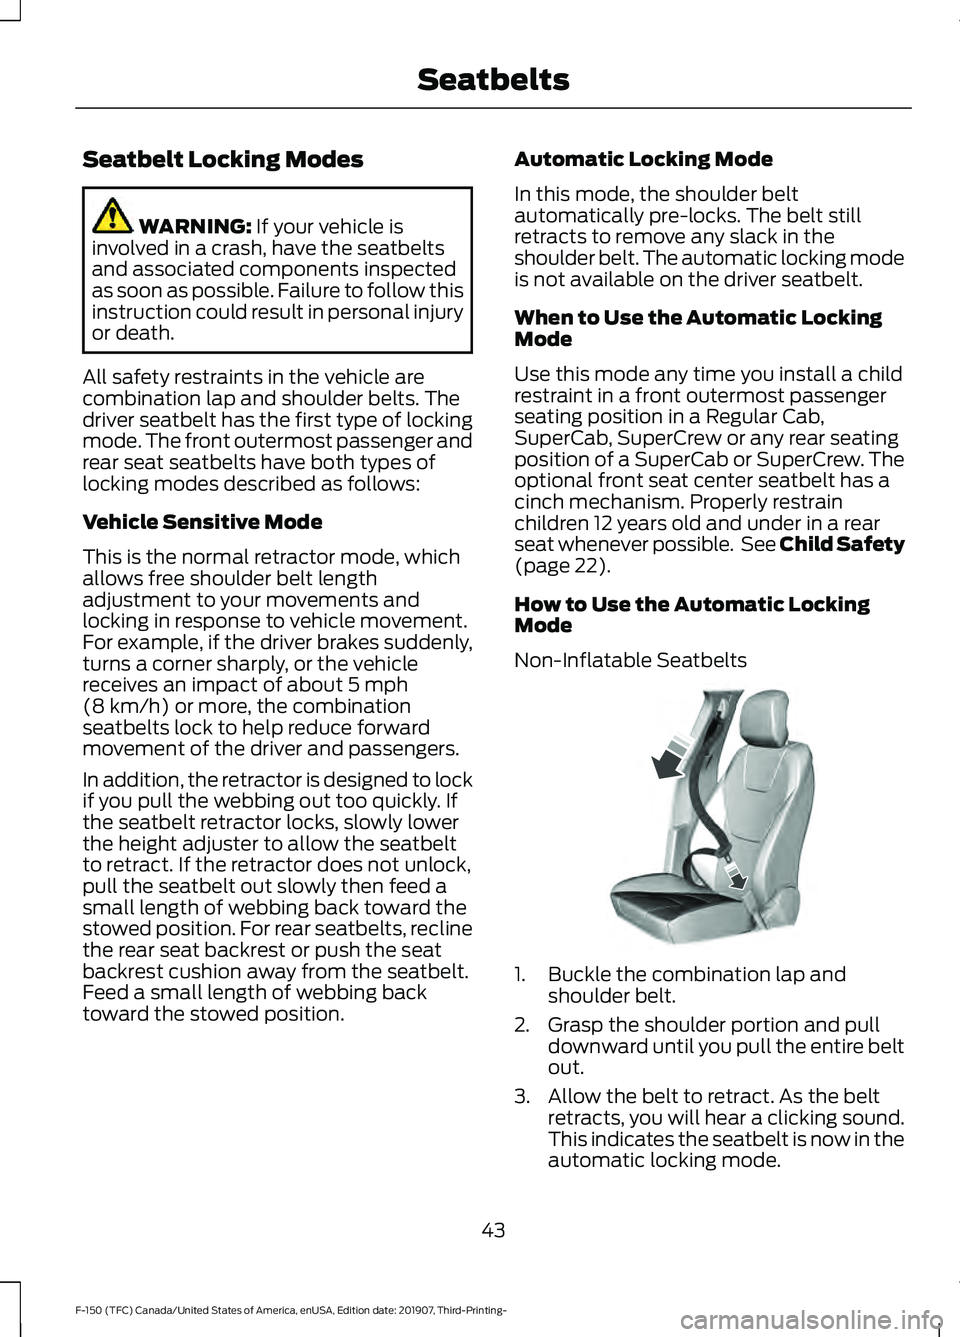 FORD F-150 2020  Owners Manual Seatbelt Locking Modes
WARNING: If your vehicle is
involved in a crash, have the seatbelts
and associated components inspected
as soon as possible. Failure to follow this
instruction could result in p